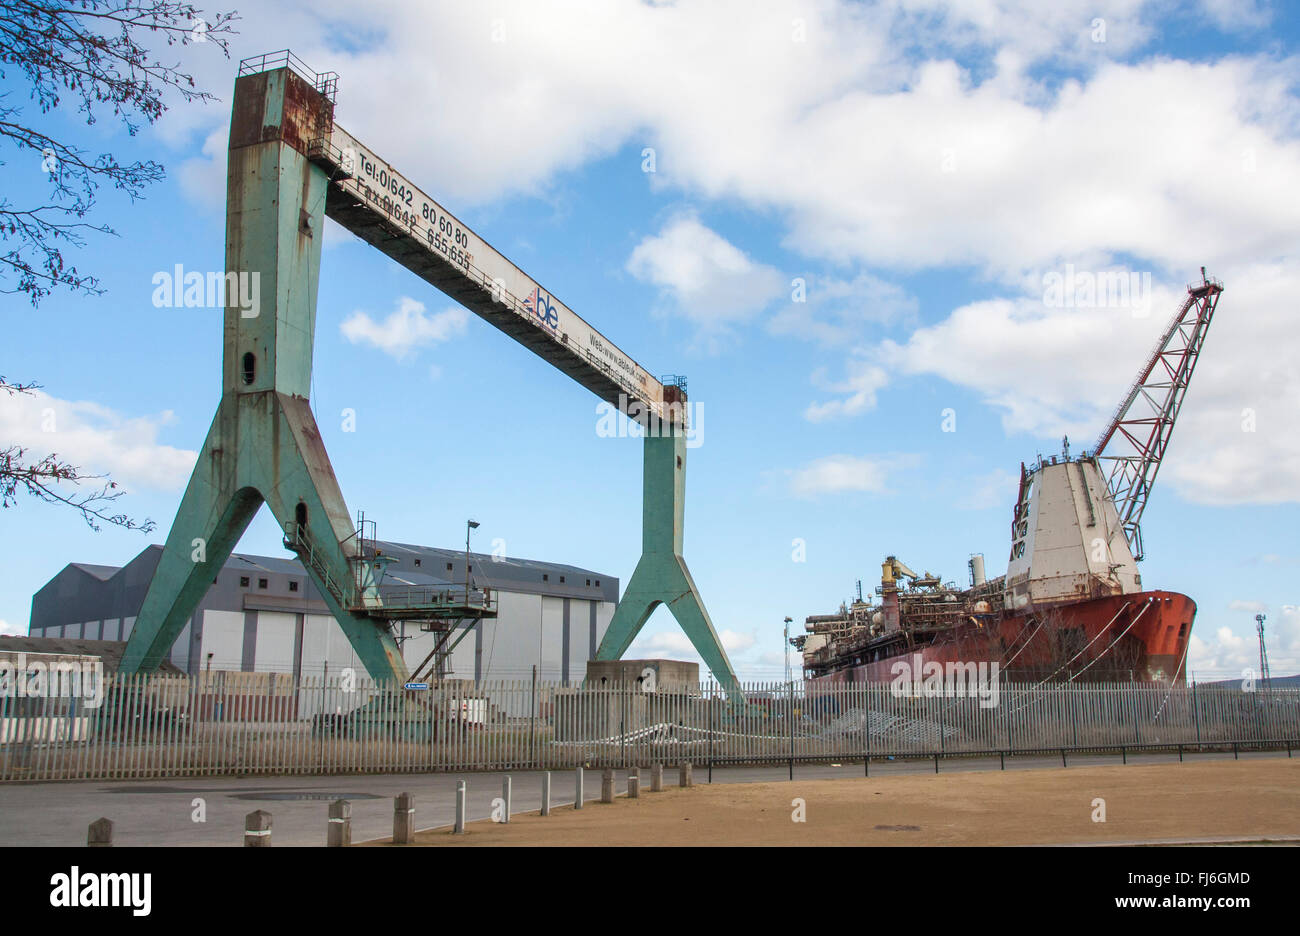 A view of the Middlehaven dockland site at Middlesbrough showing an industrial crane and North Sea Producer oil vessel. Stock Photo